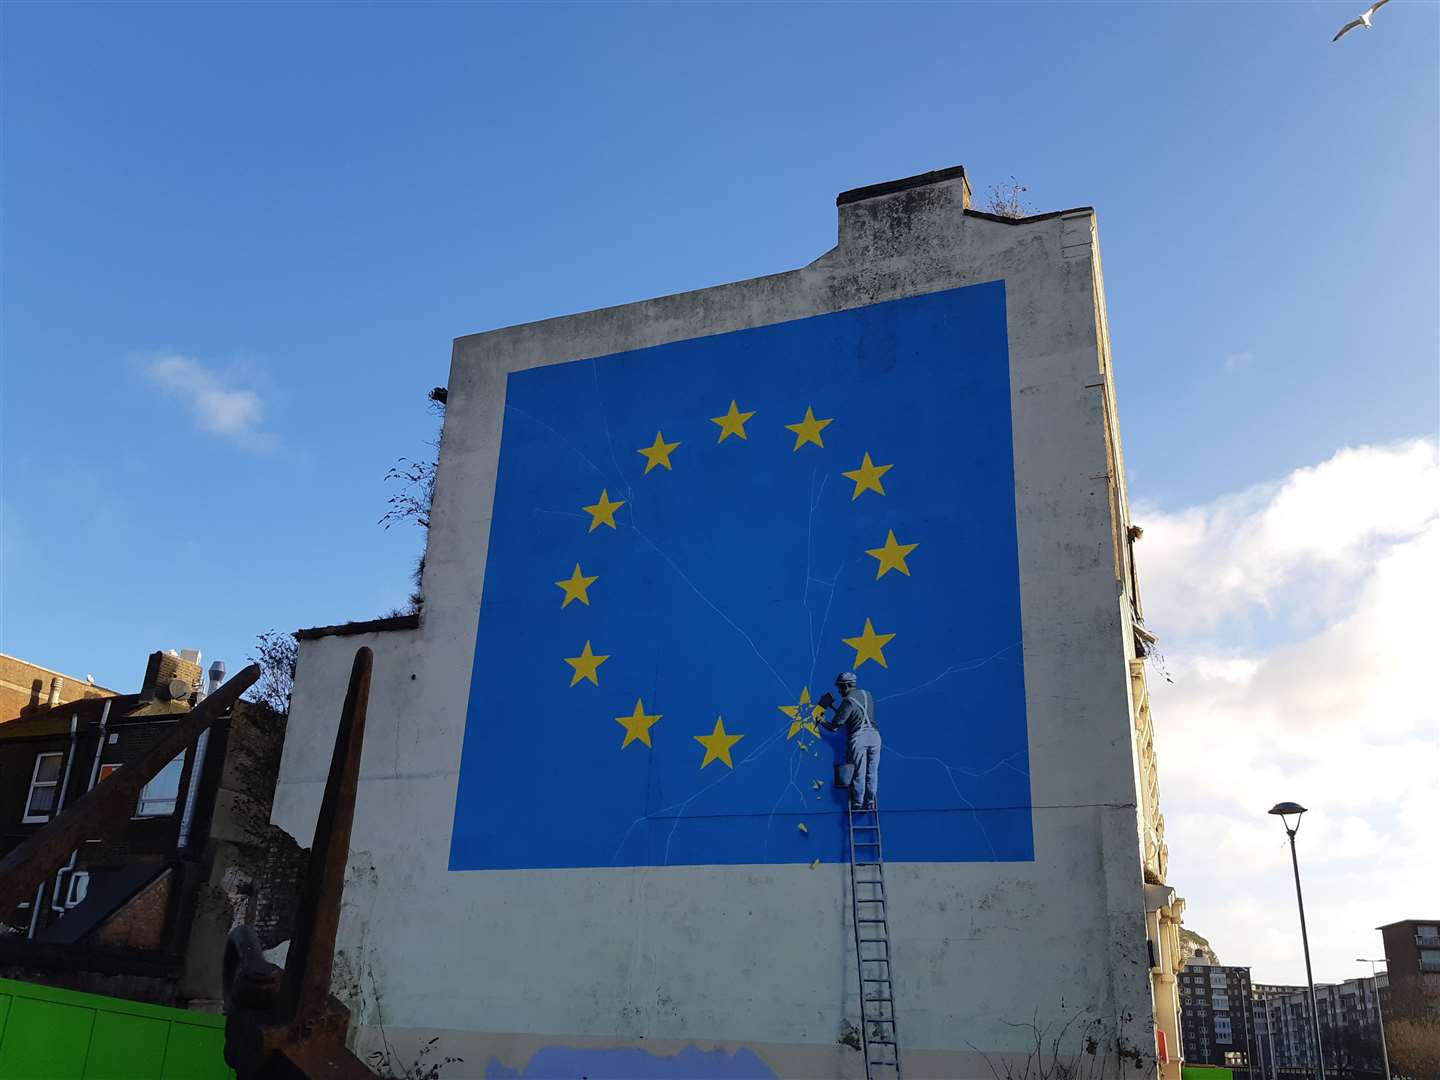 Will the renowned Brexit Banksy be replicated at Franksy's exhibition?